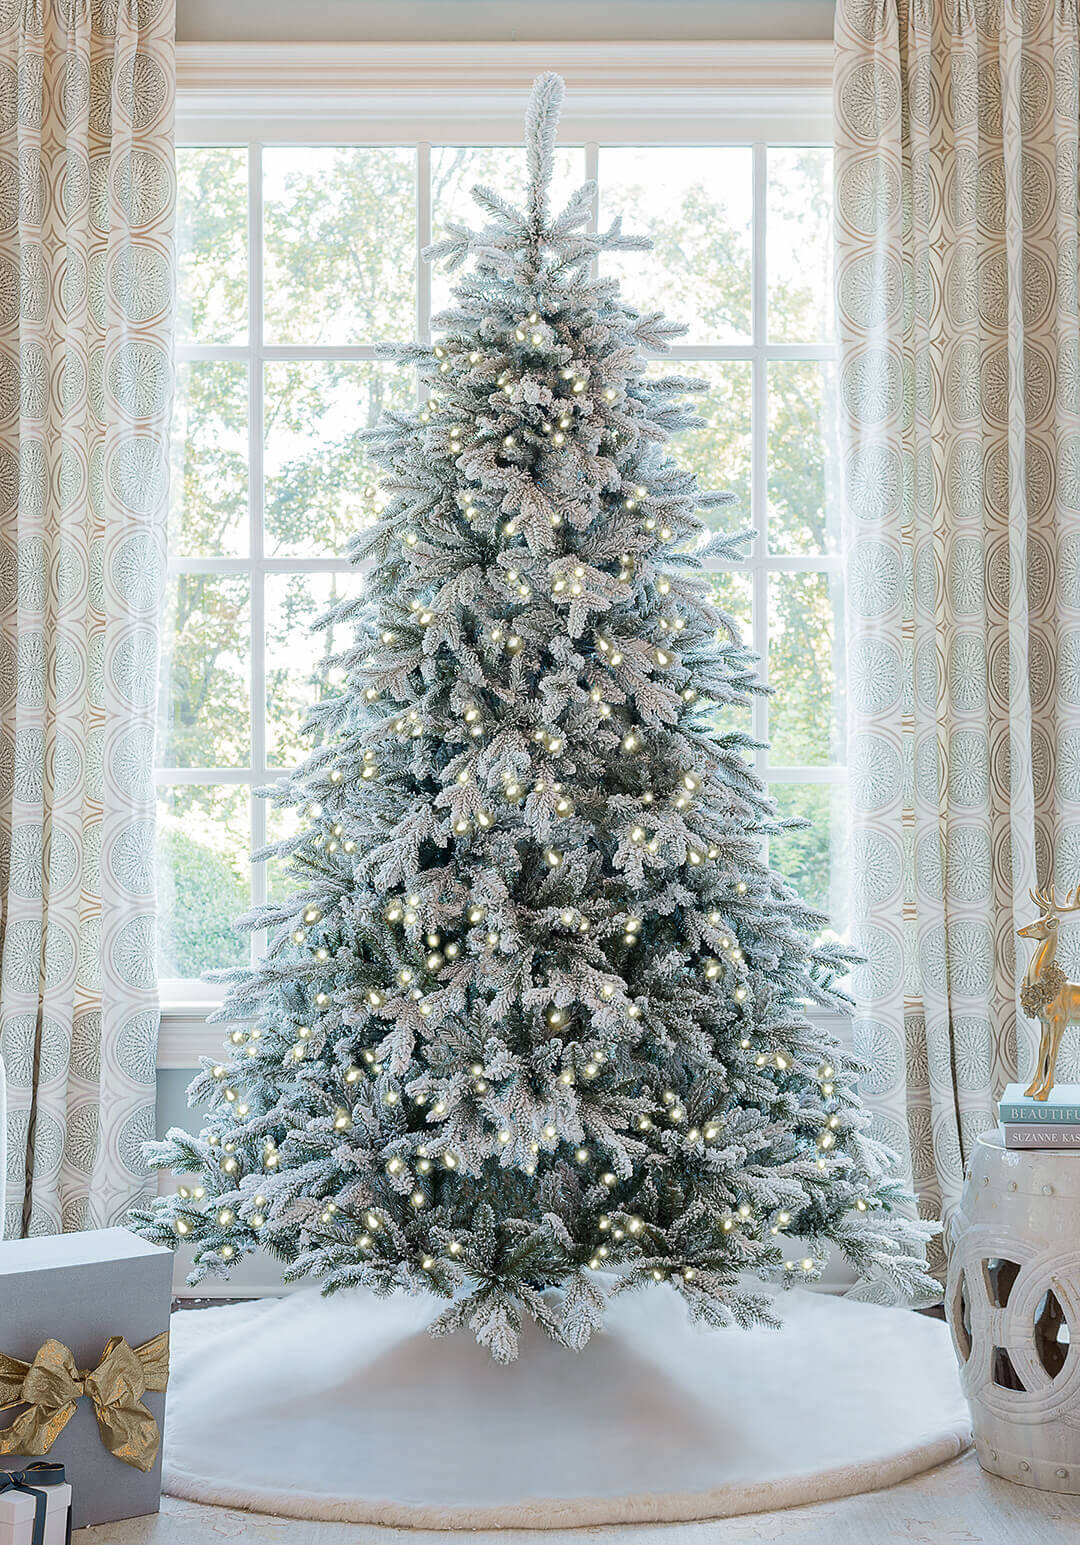 King of Christmas 6.5' Queen Flock® Artificial Christmas Tree with 650 Warm White LED Lights